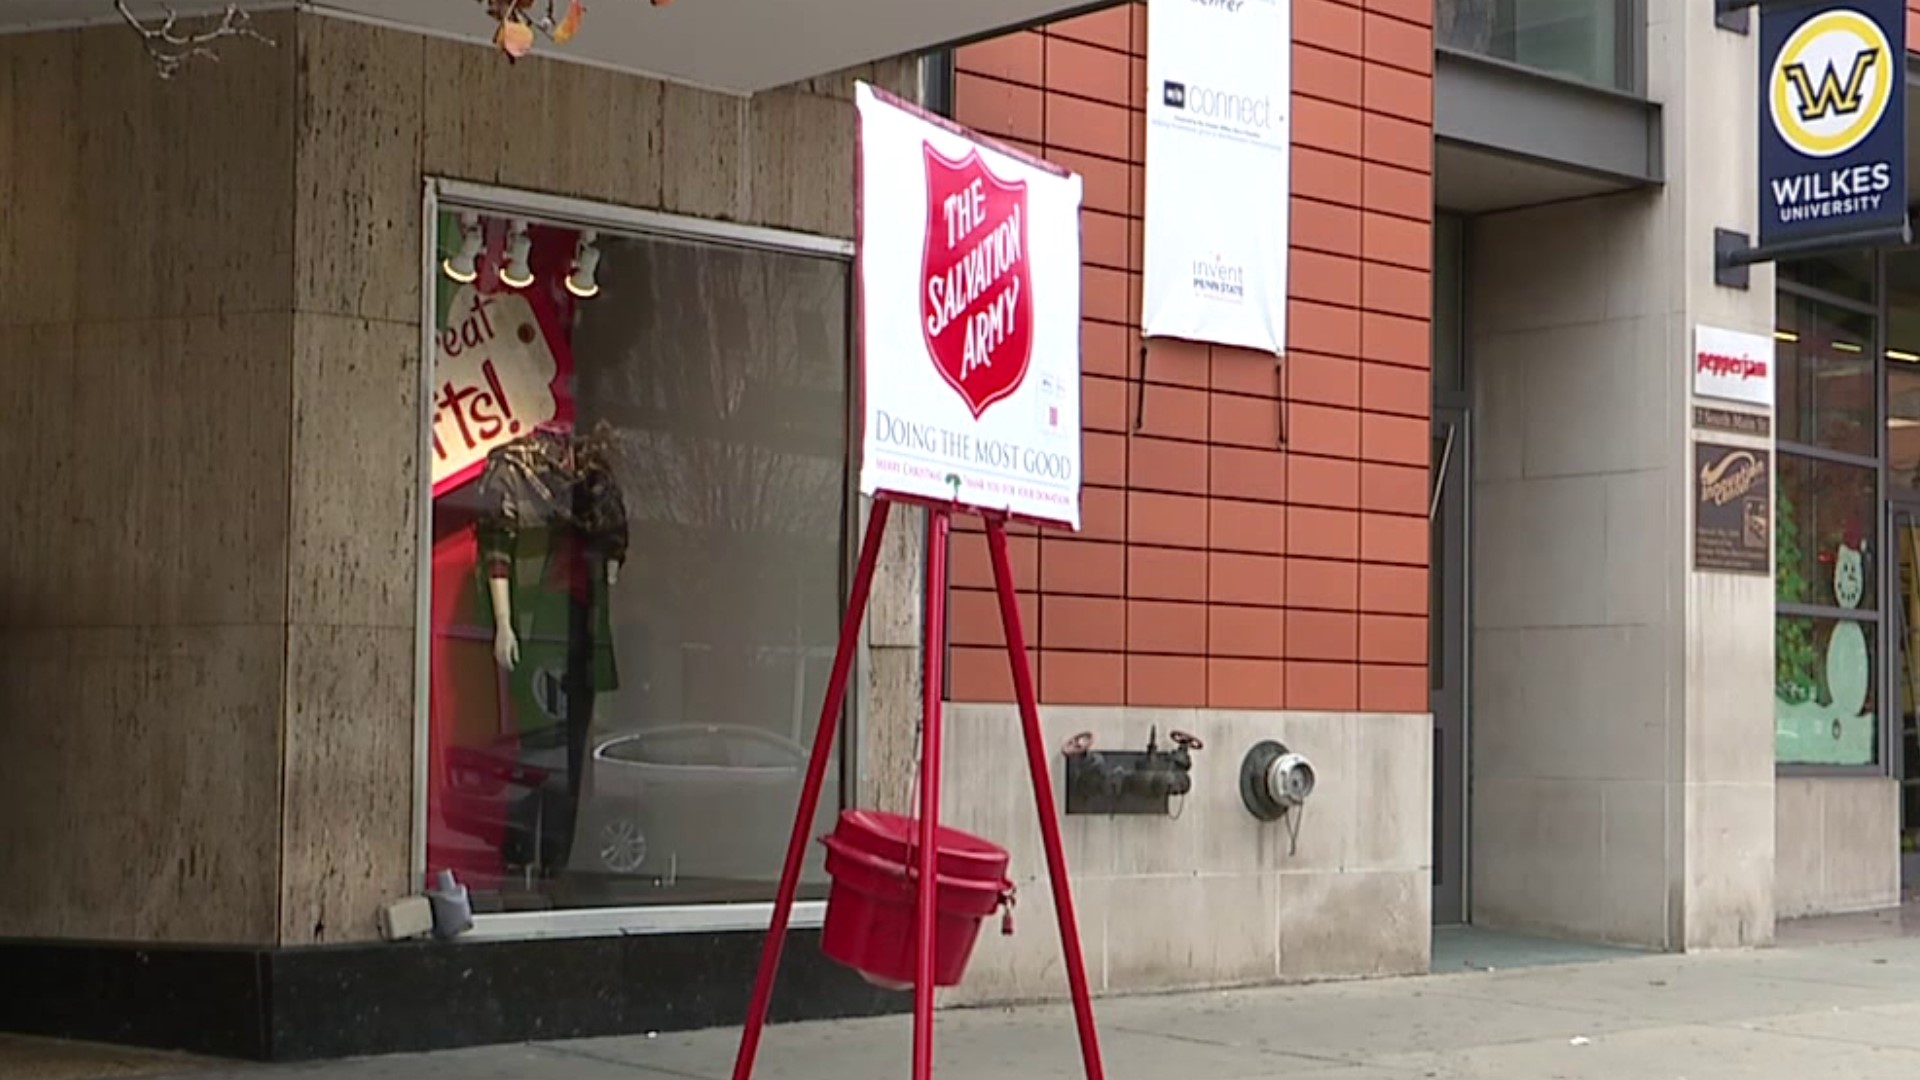 A shortage of volunteers means The Salvation Army is now paying bell ringers for the first time ever.